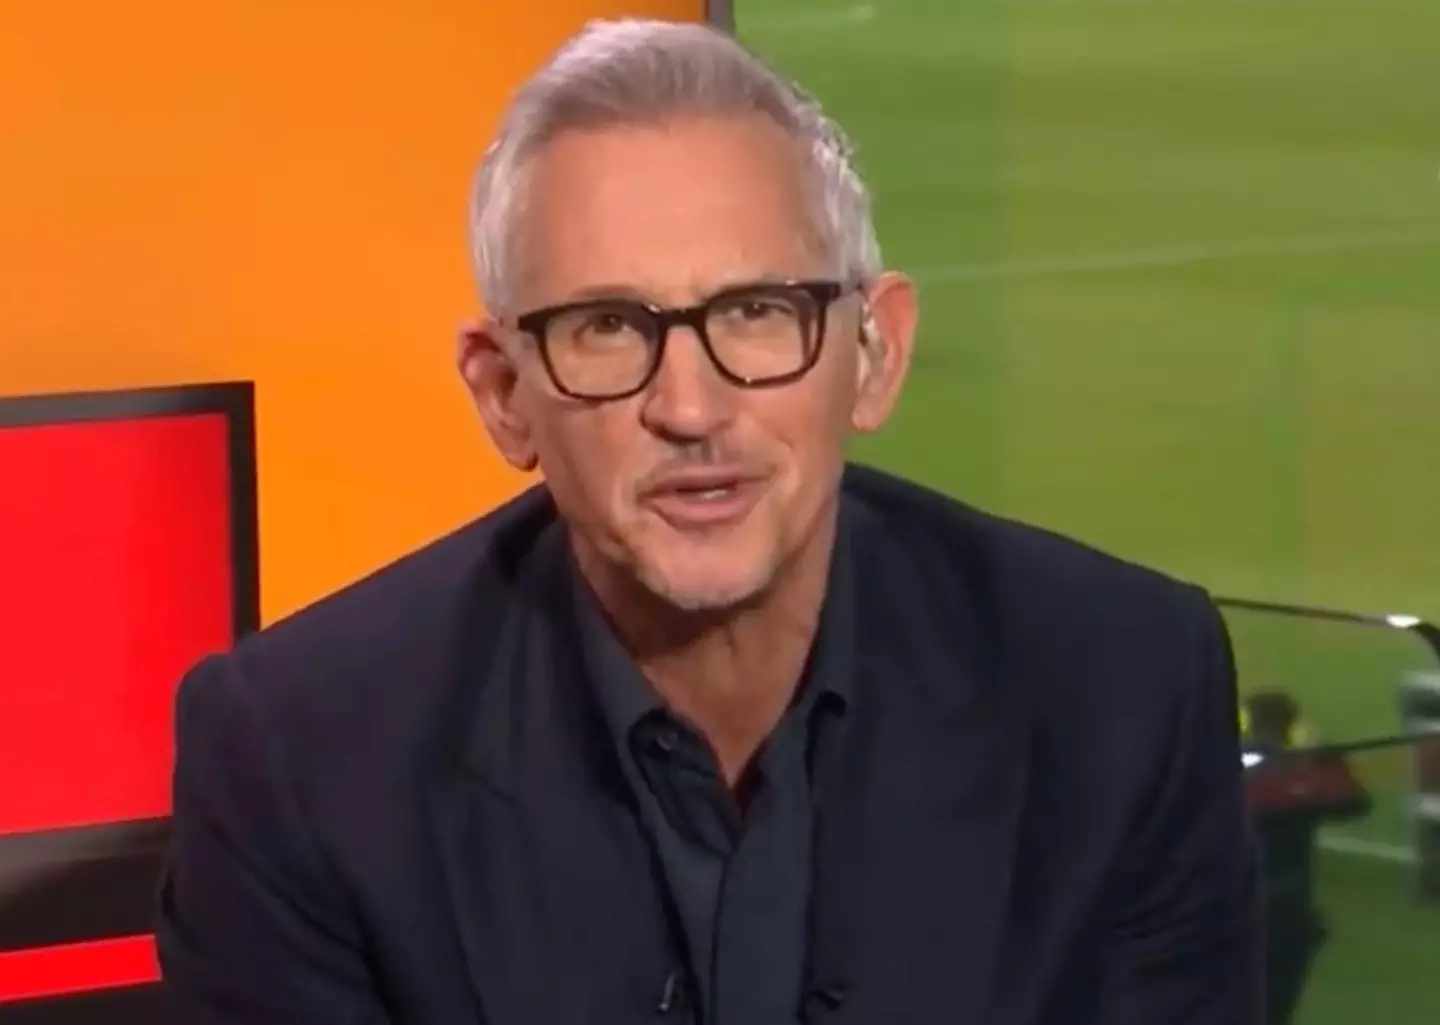 Fans are calling for Lineker to be put back on air.